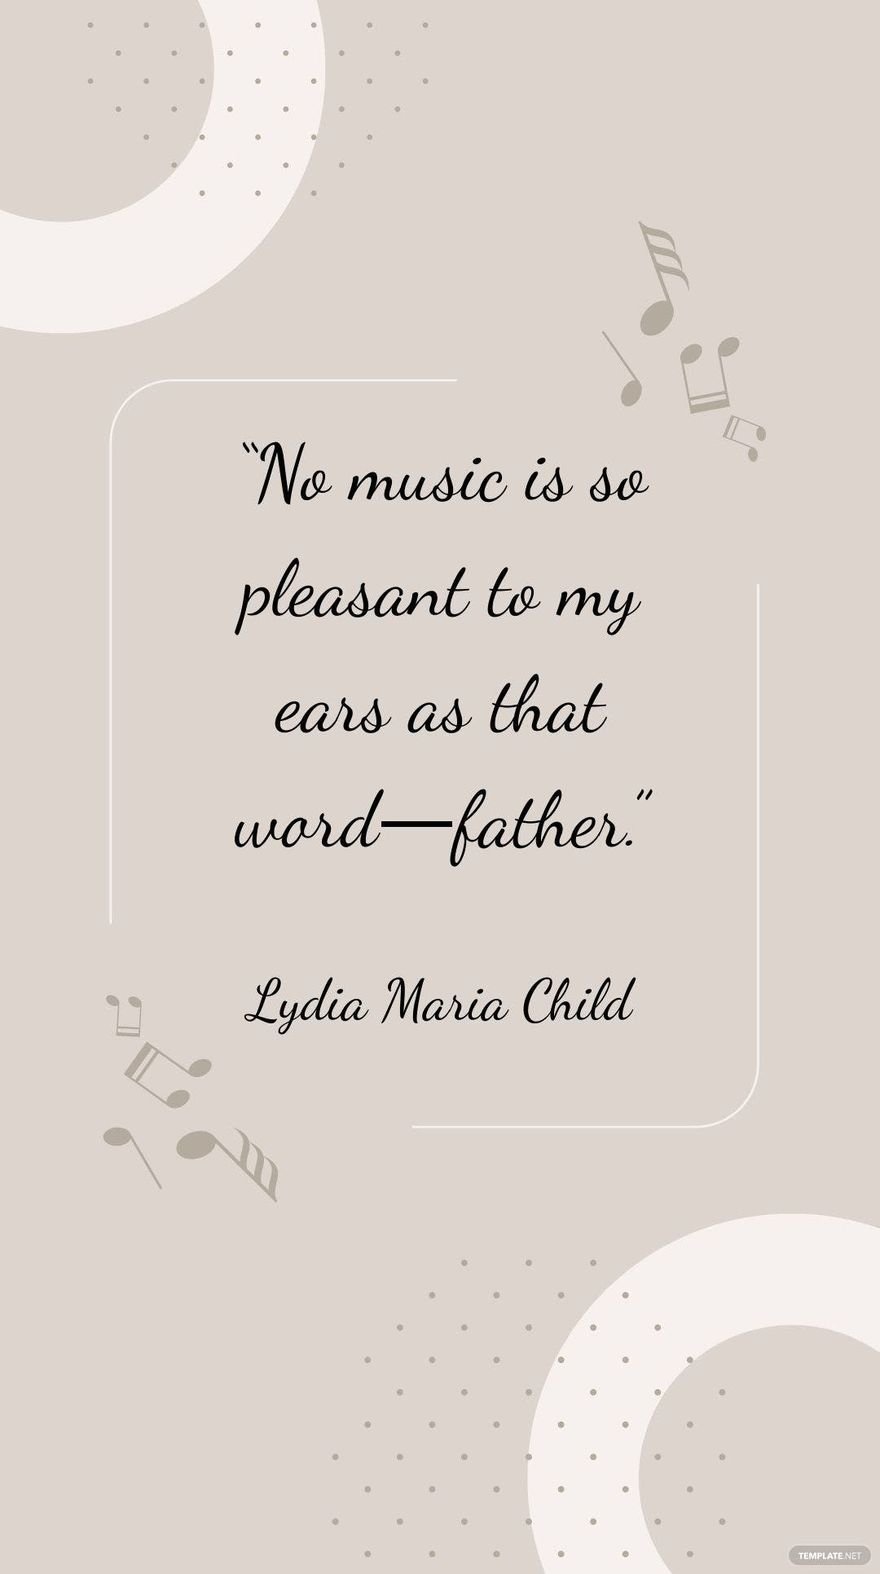 Free Lydia Maria Child - “No music is so pleasant to my ears as that word father.”